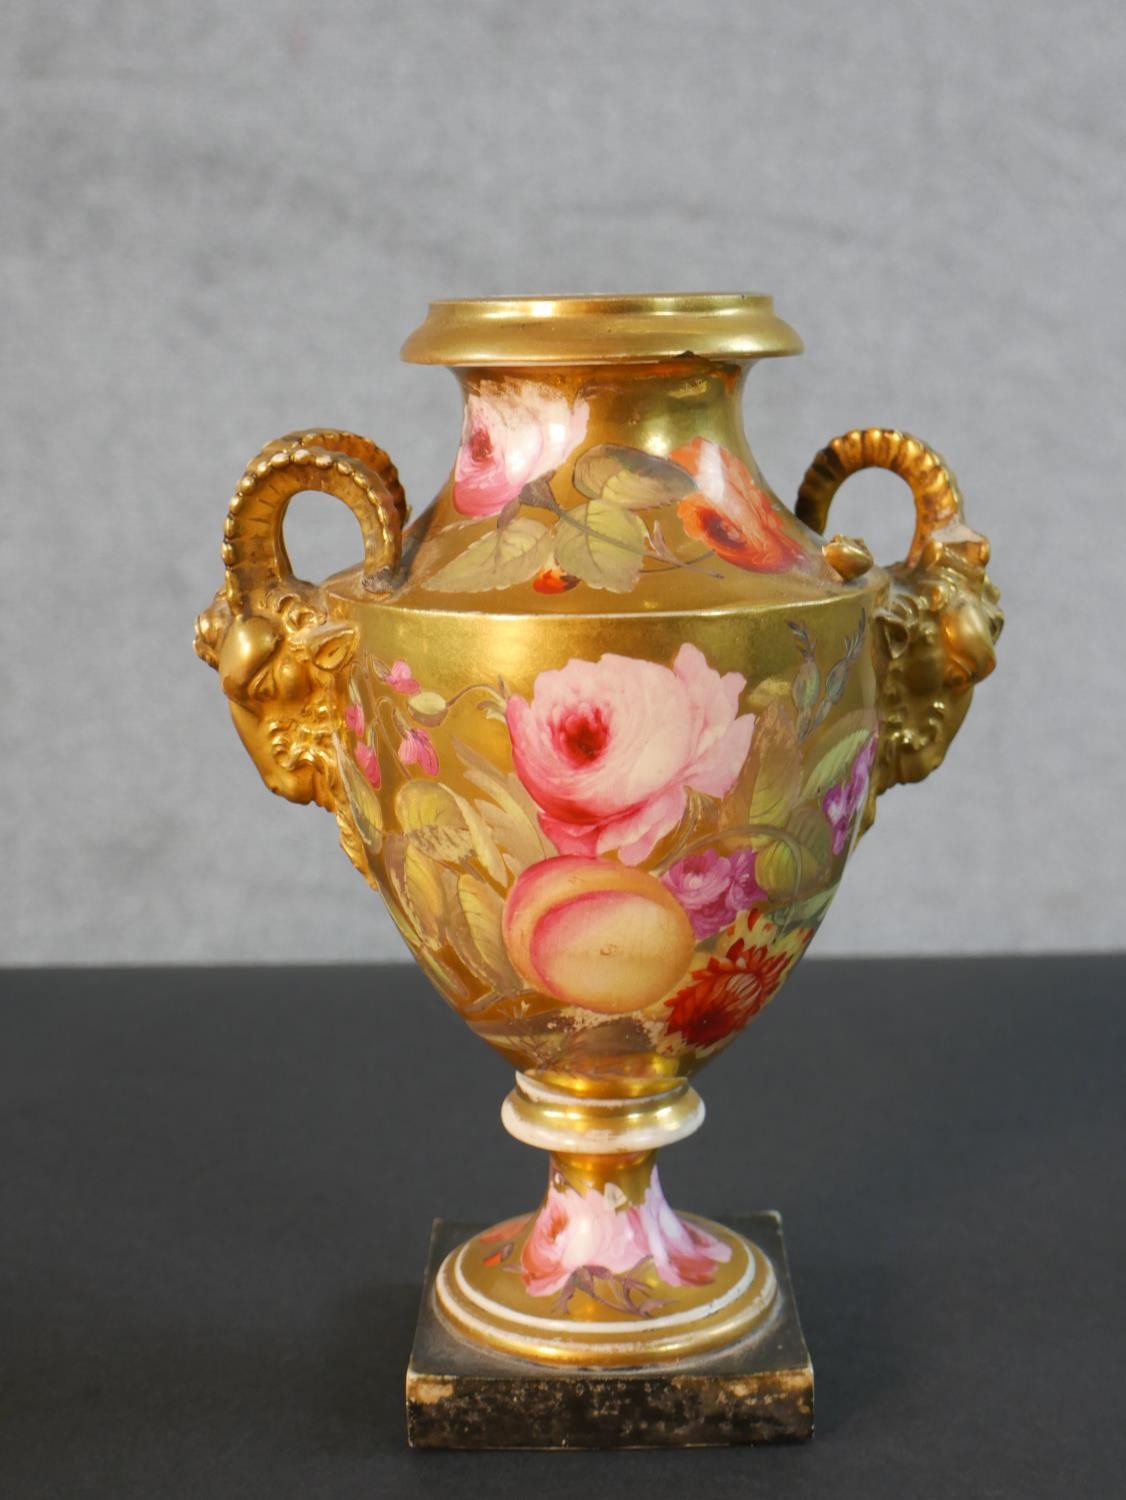 Three 19th century hand painted porcelain urns, one with gilded rams head handles and rose design ( - Image 2 of 6